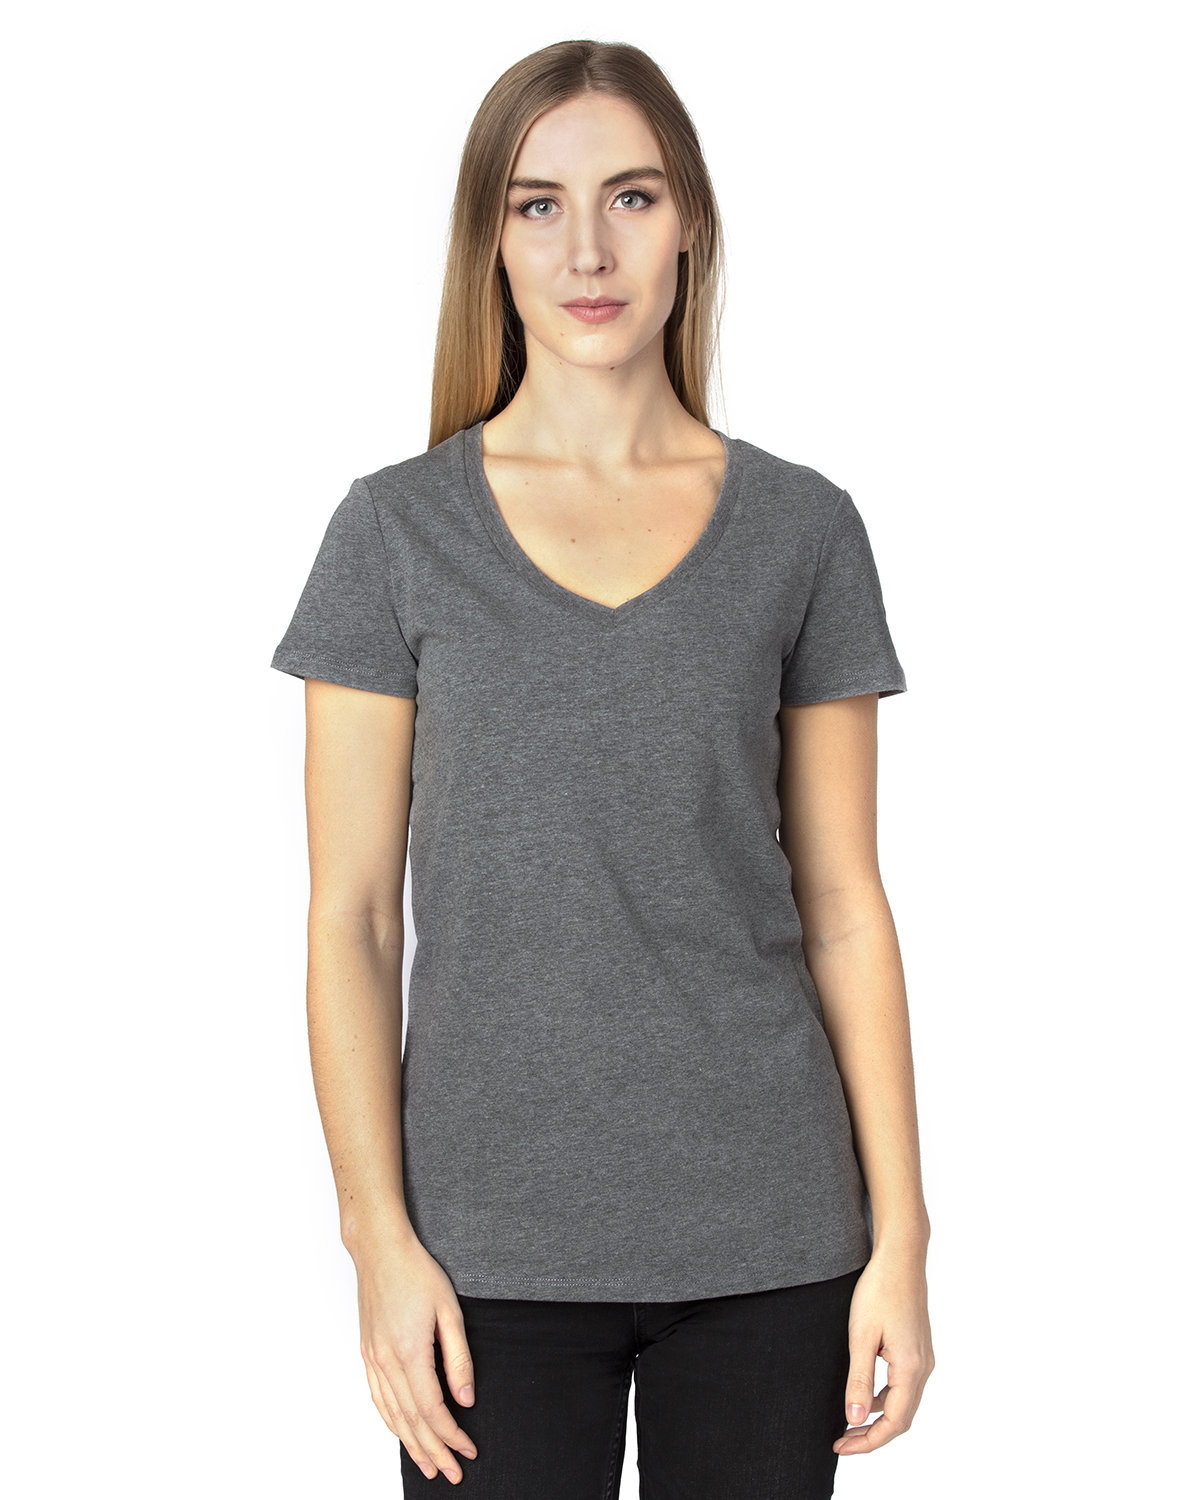 Threadfast Ladies' Ultimate V-Neck T-Shirt CHARCOAL HEATHER 